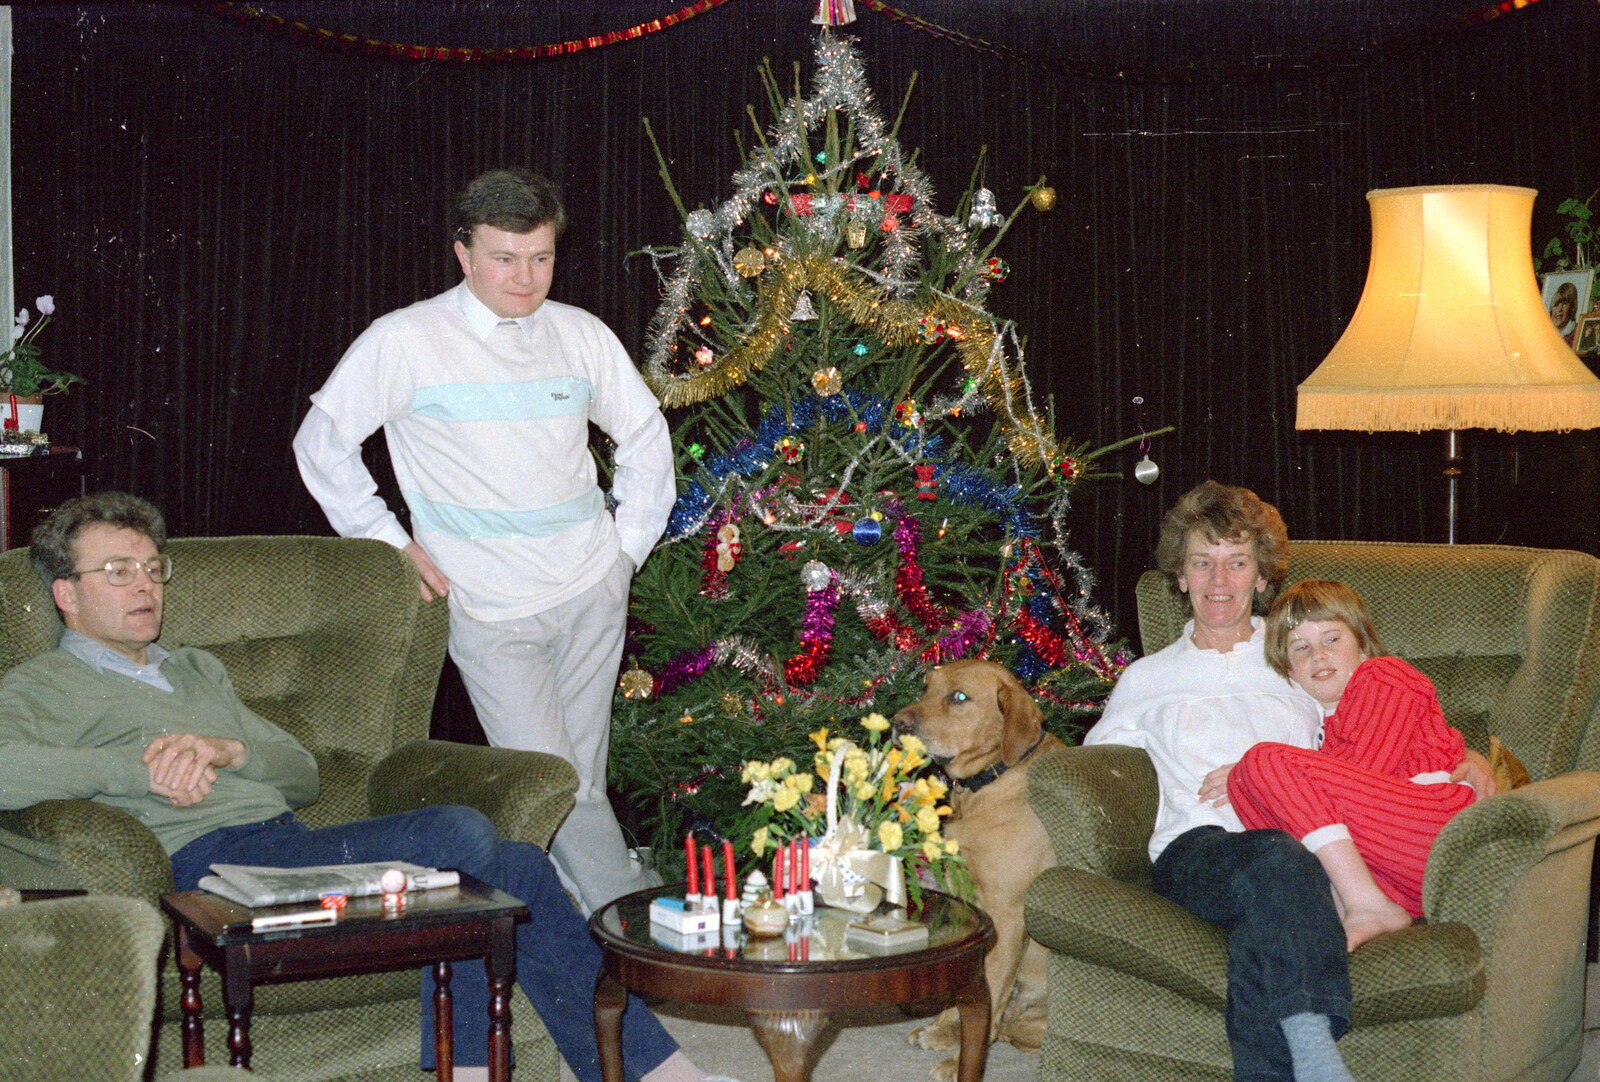 Hamish and family in their lounge from Brockenhurst College Presentation and Christmas, Hampshire - 19th December 1985